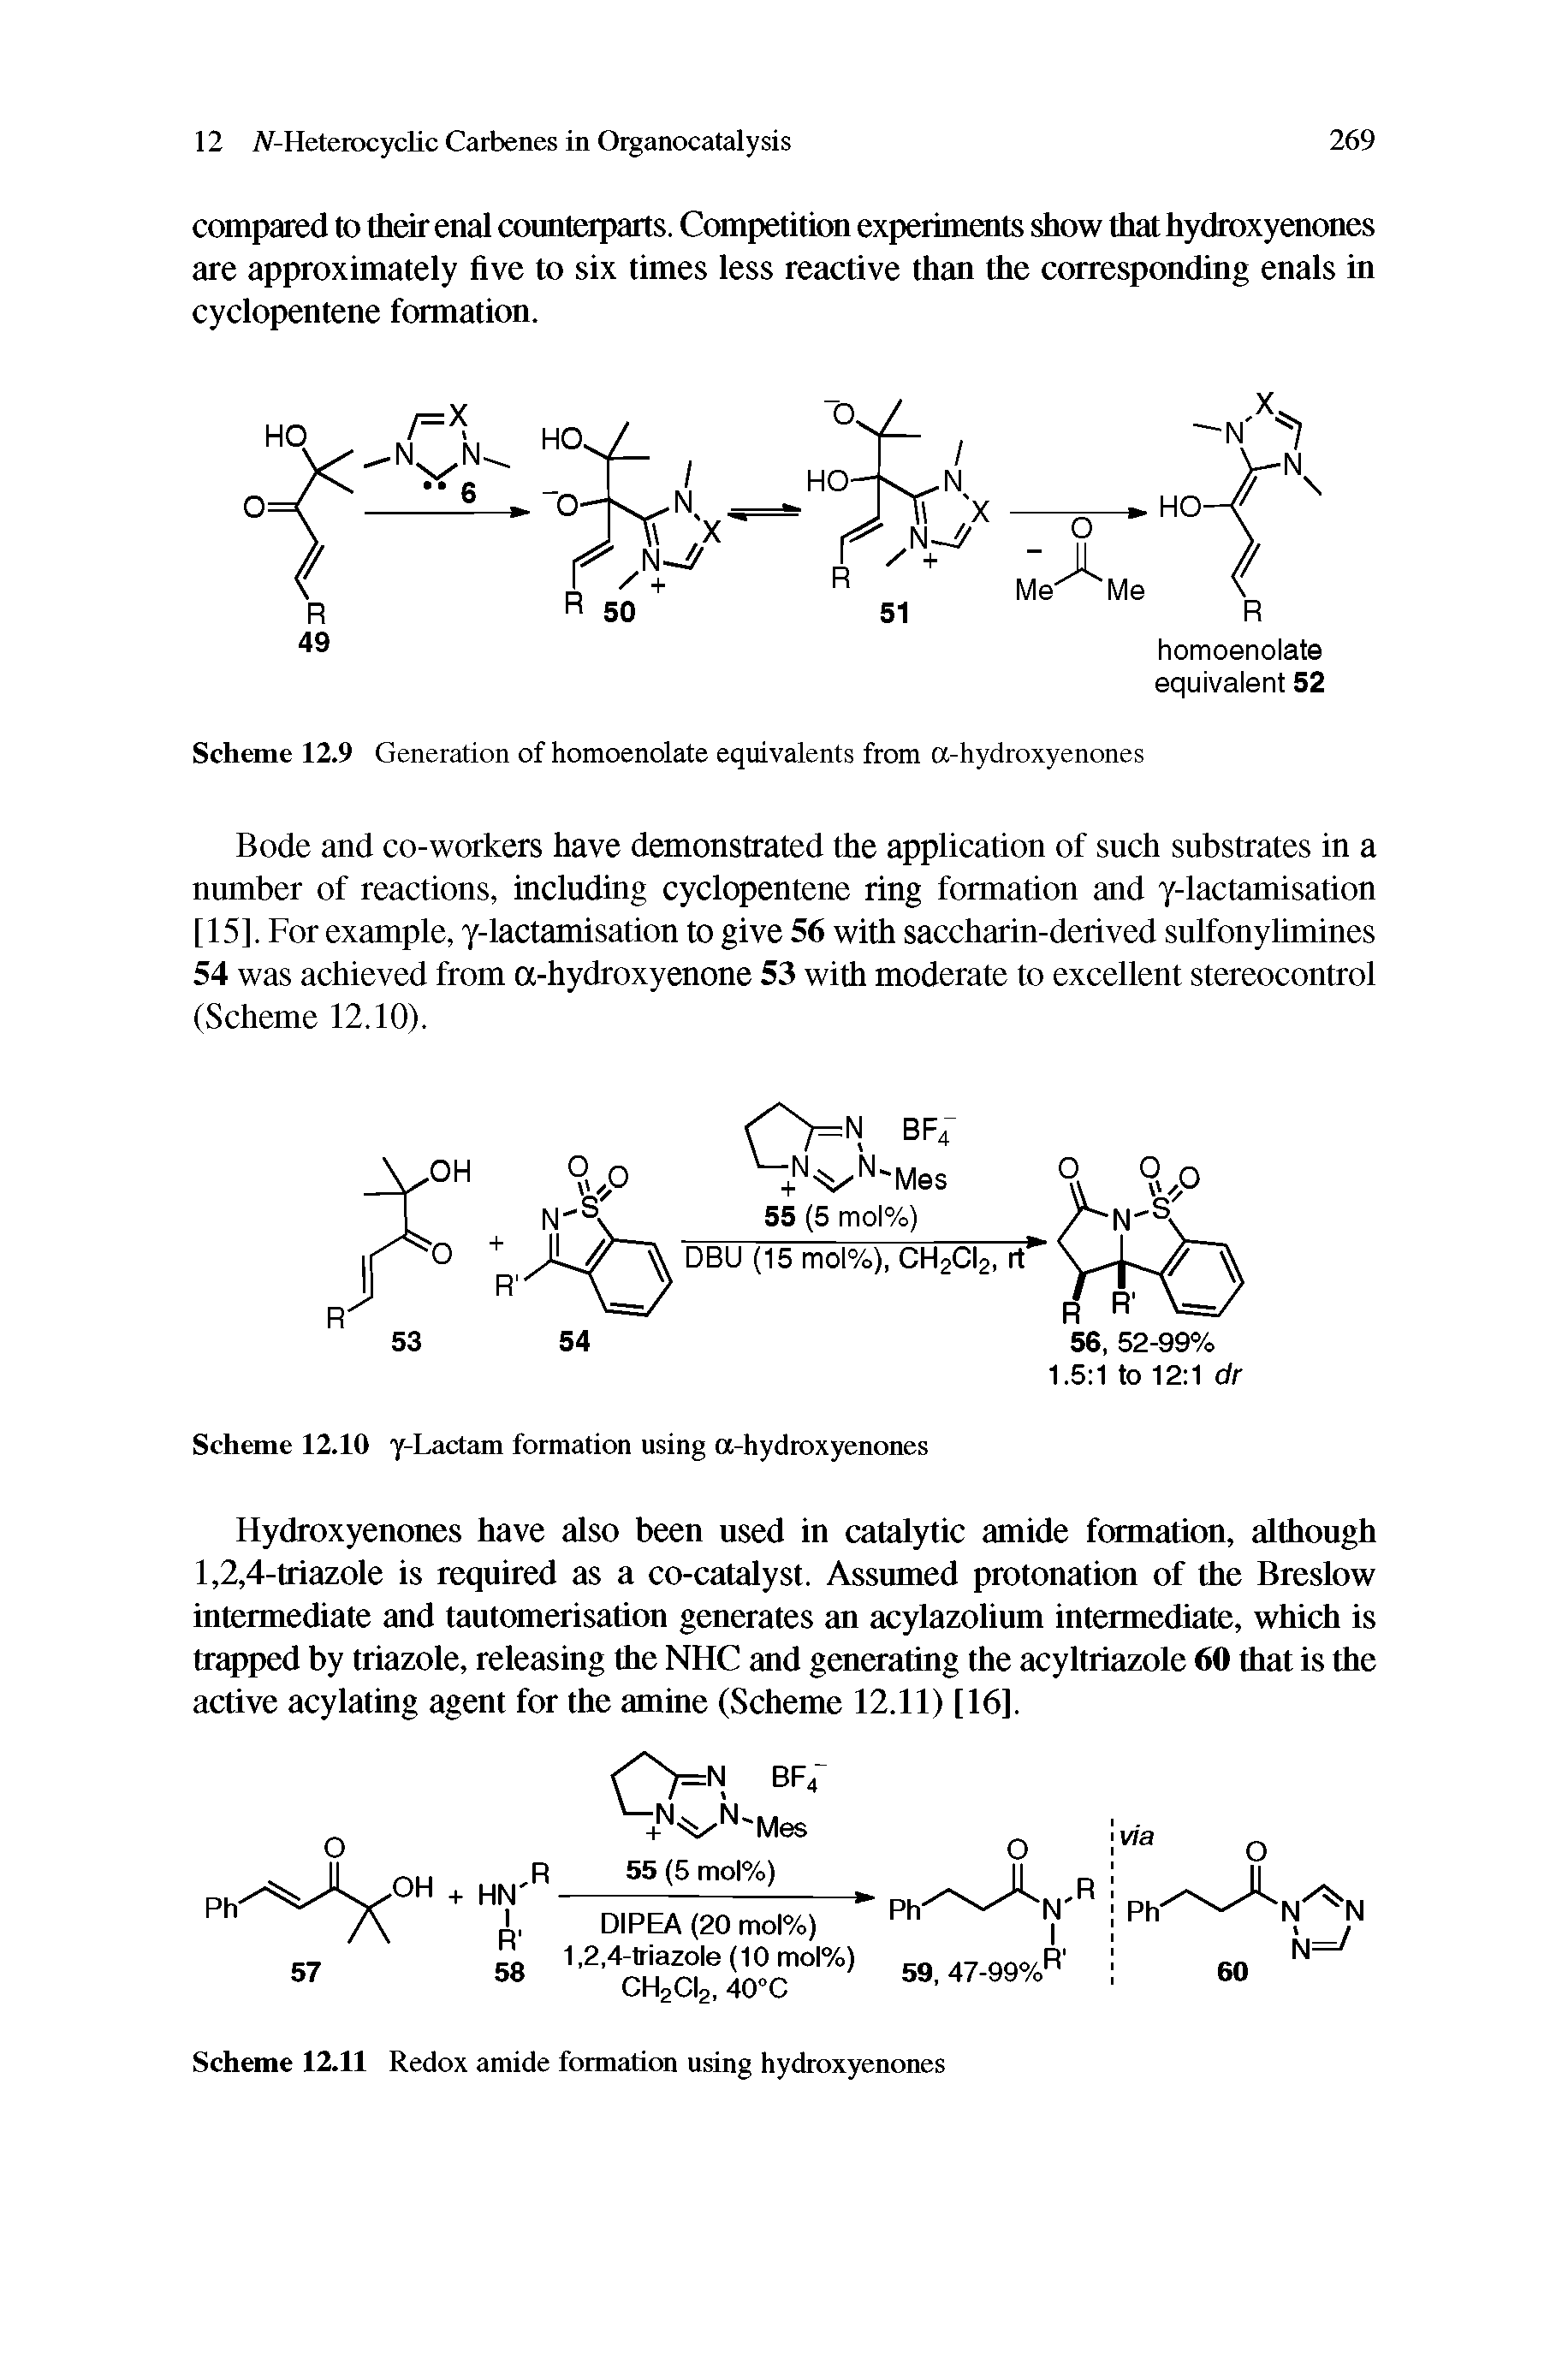 Scheme 12.9 Generation of homoenolate equivalents from a-hydroxyenones...